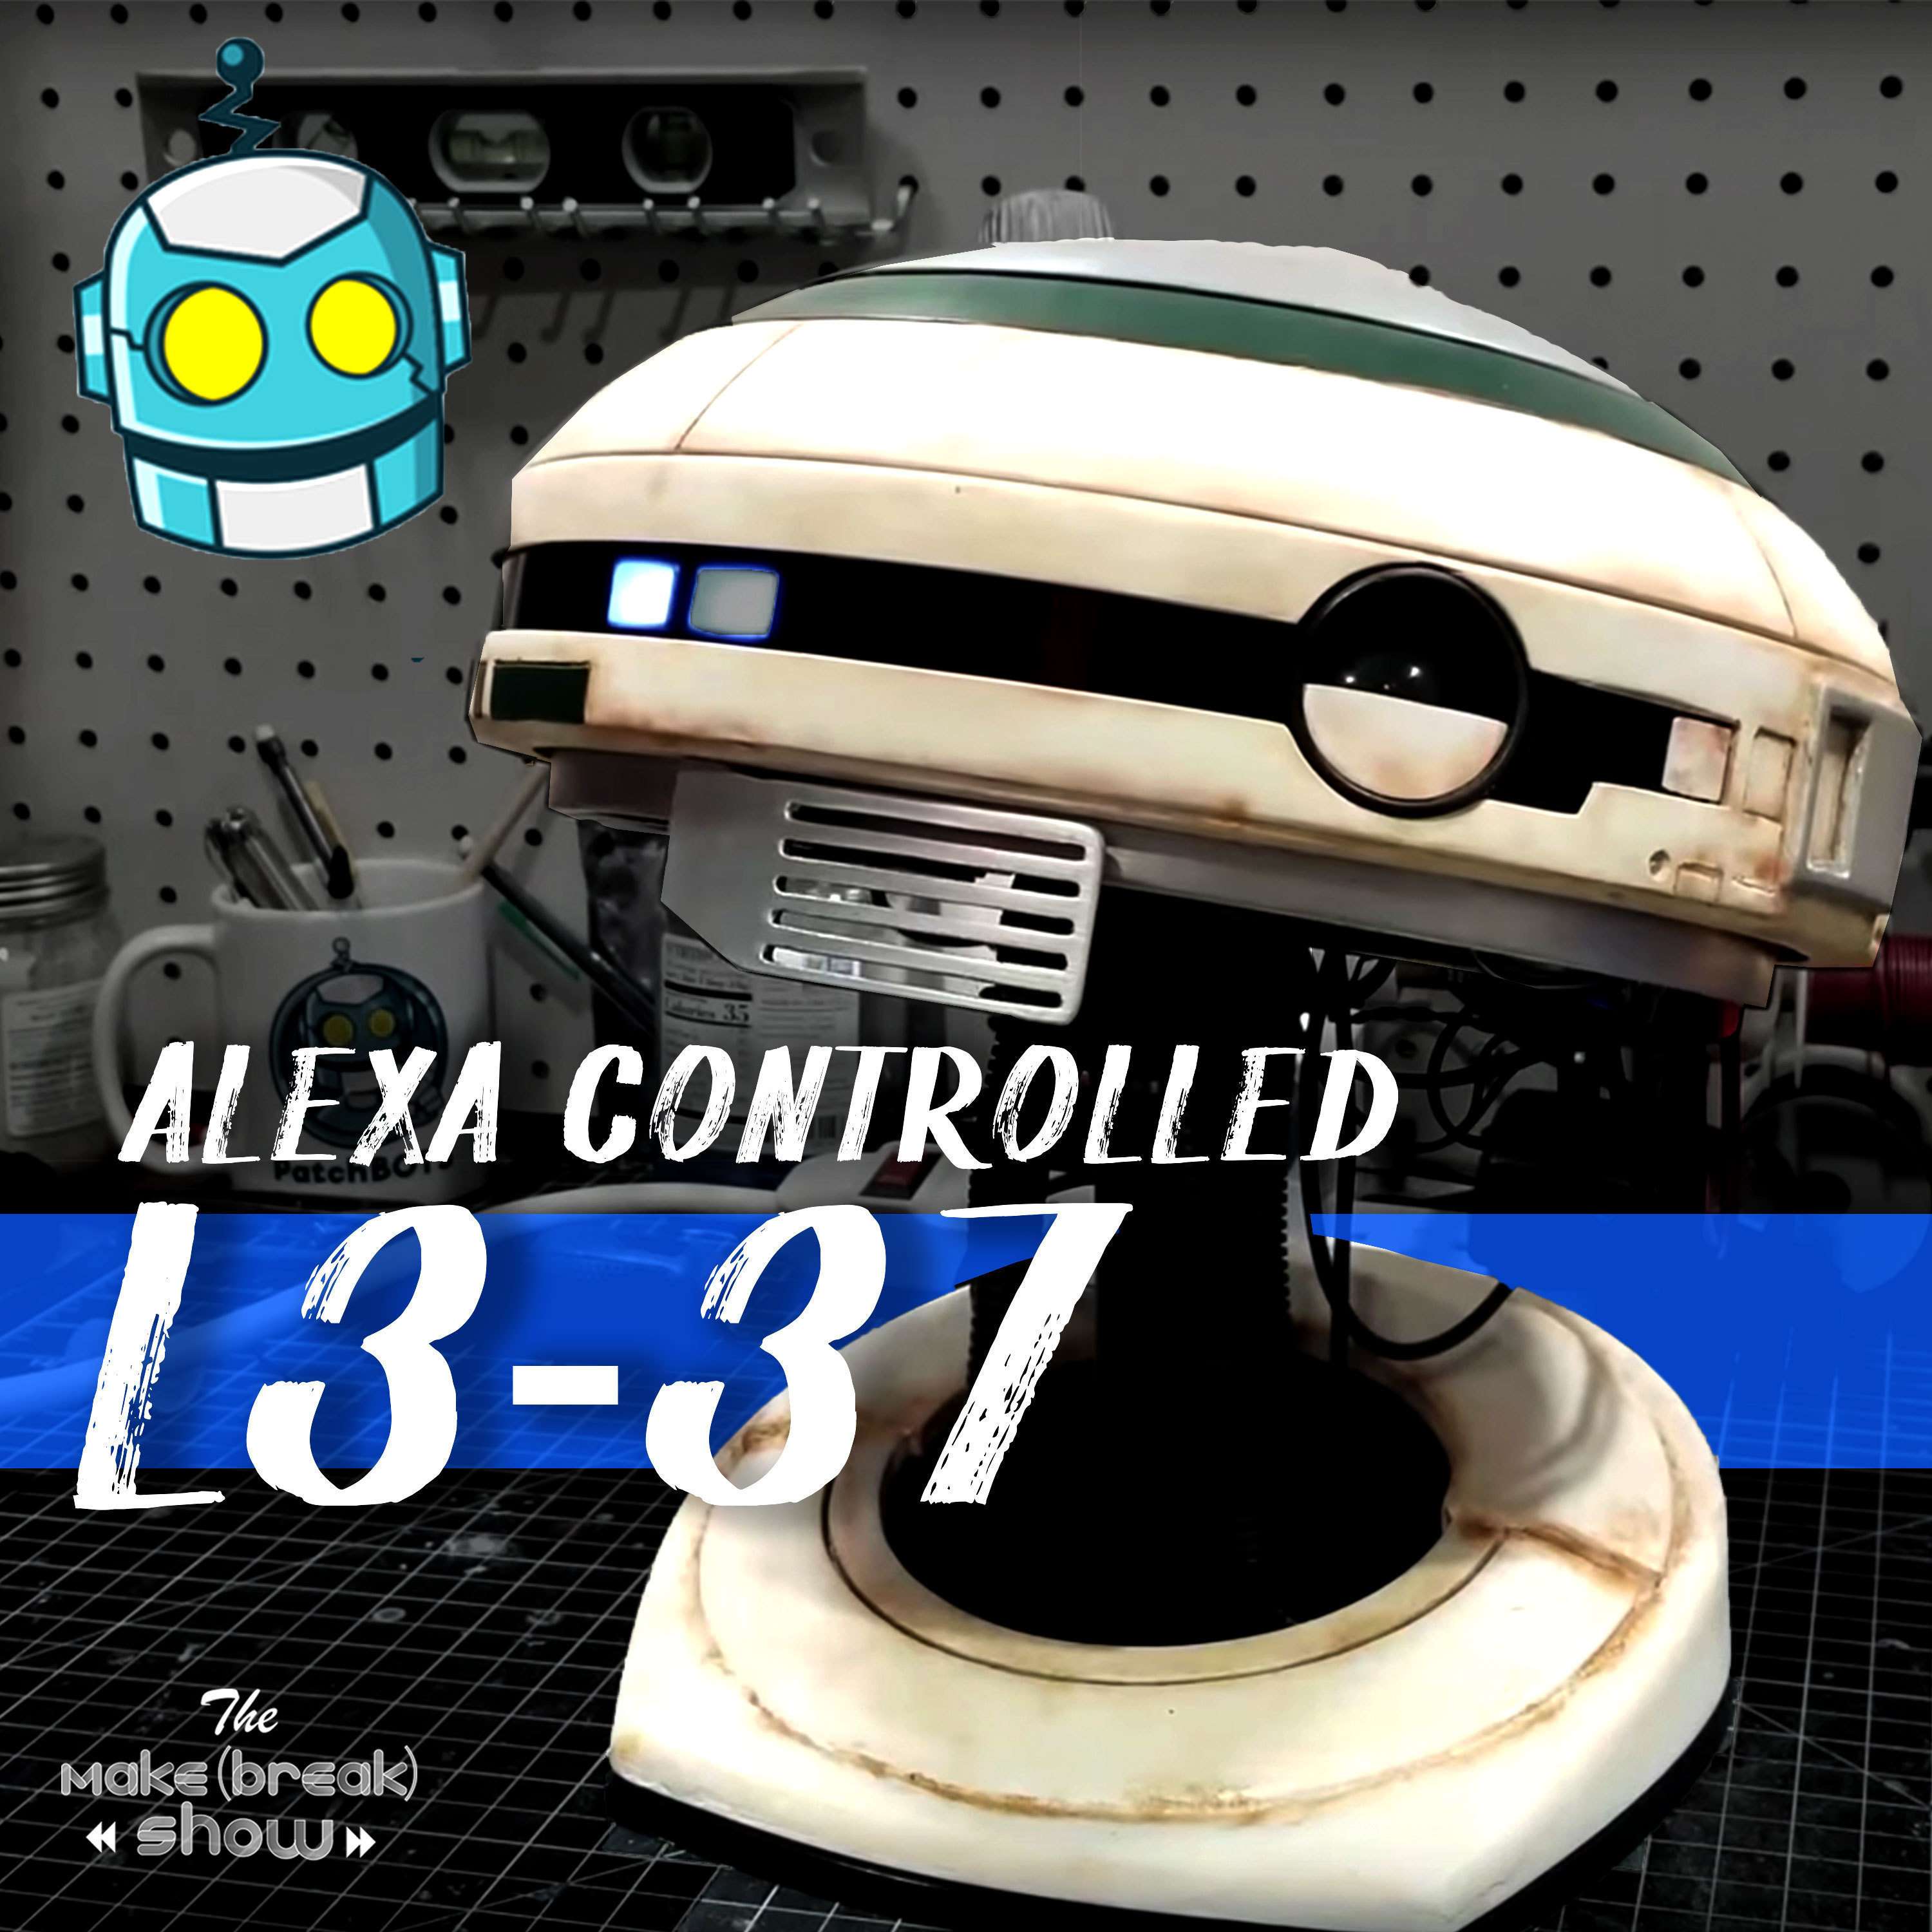 053: Building an Alexa Controlled Star Wars Droid with PatchBOTS